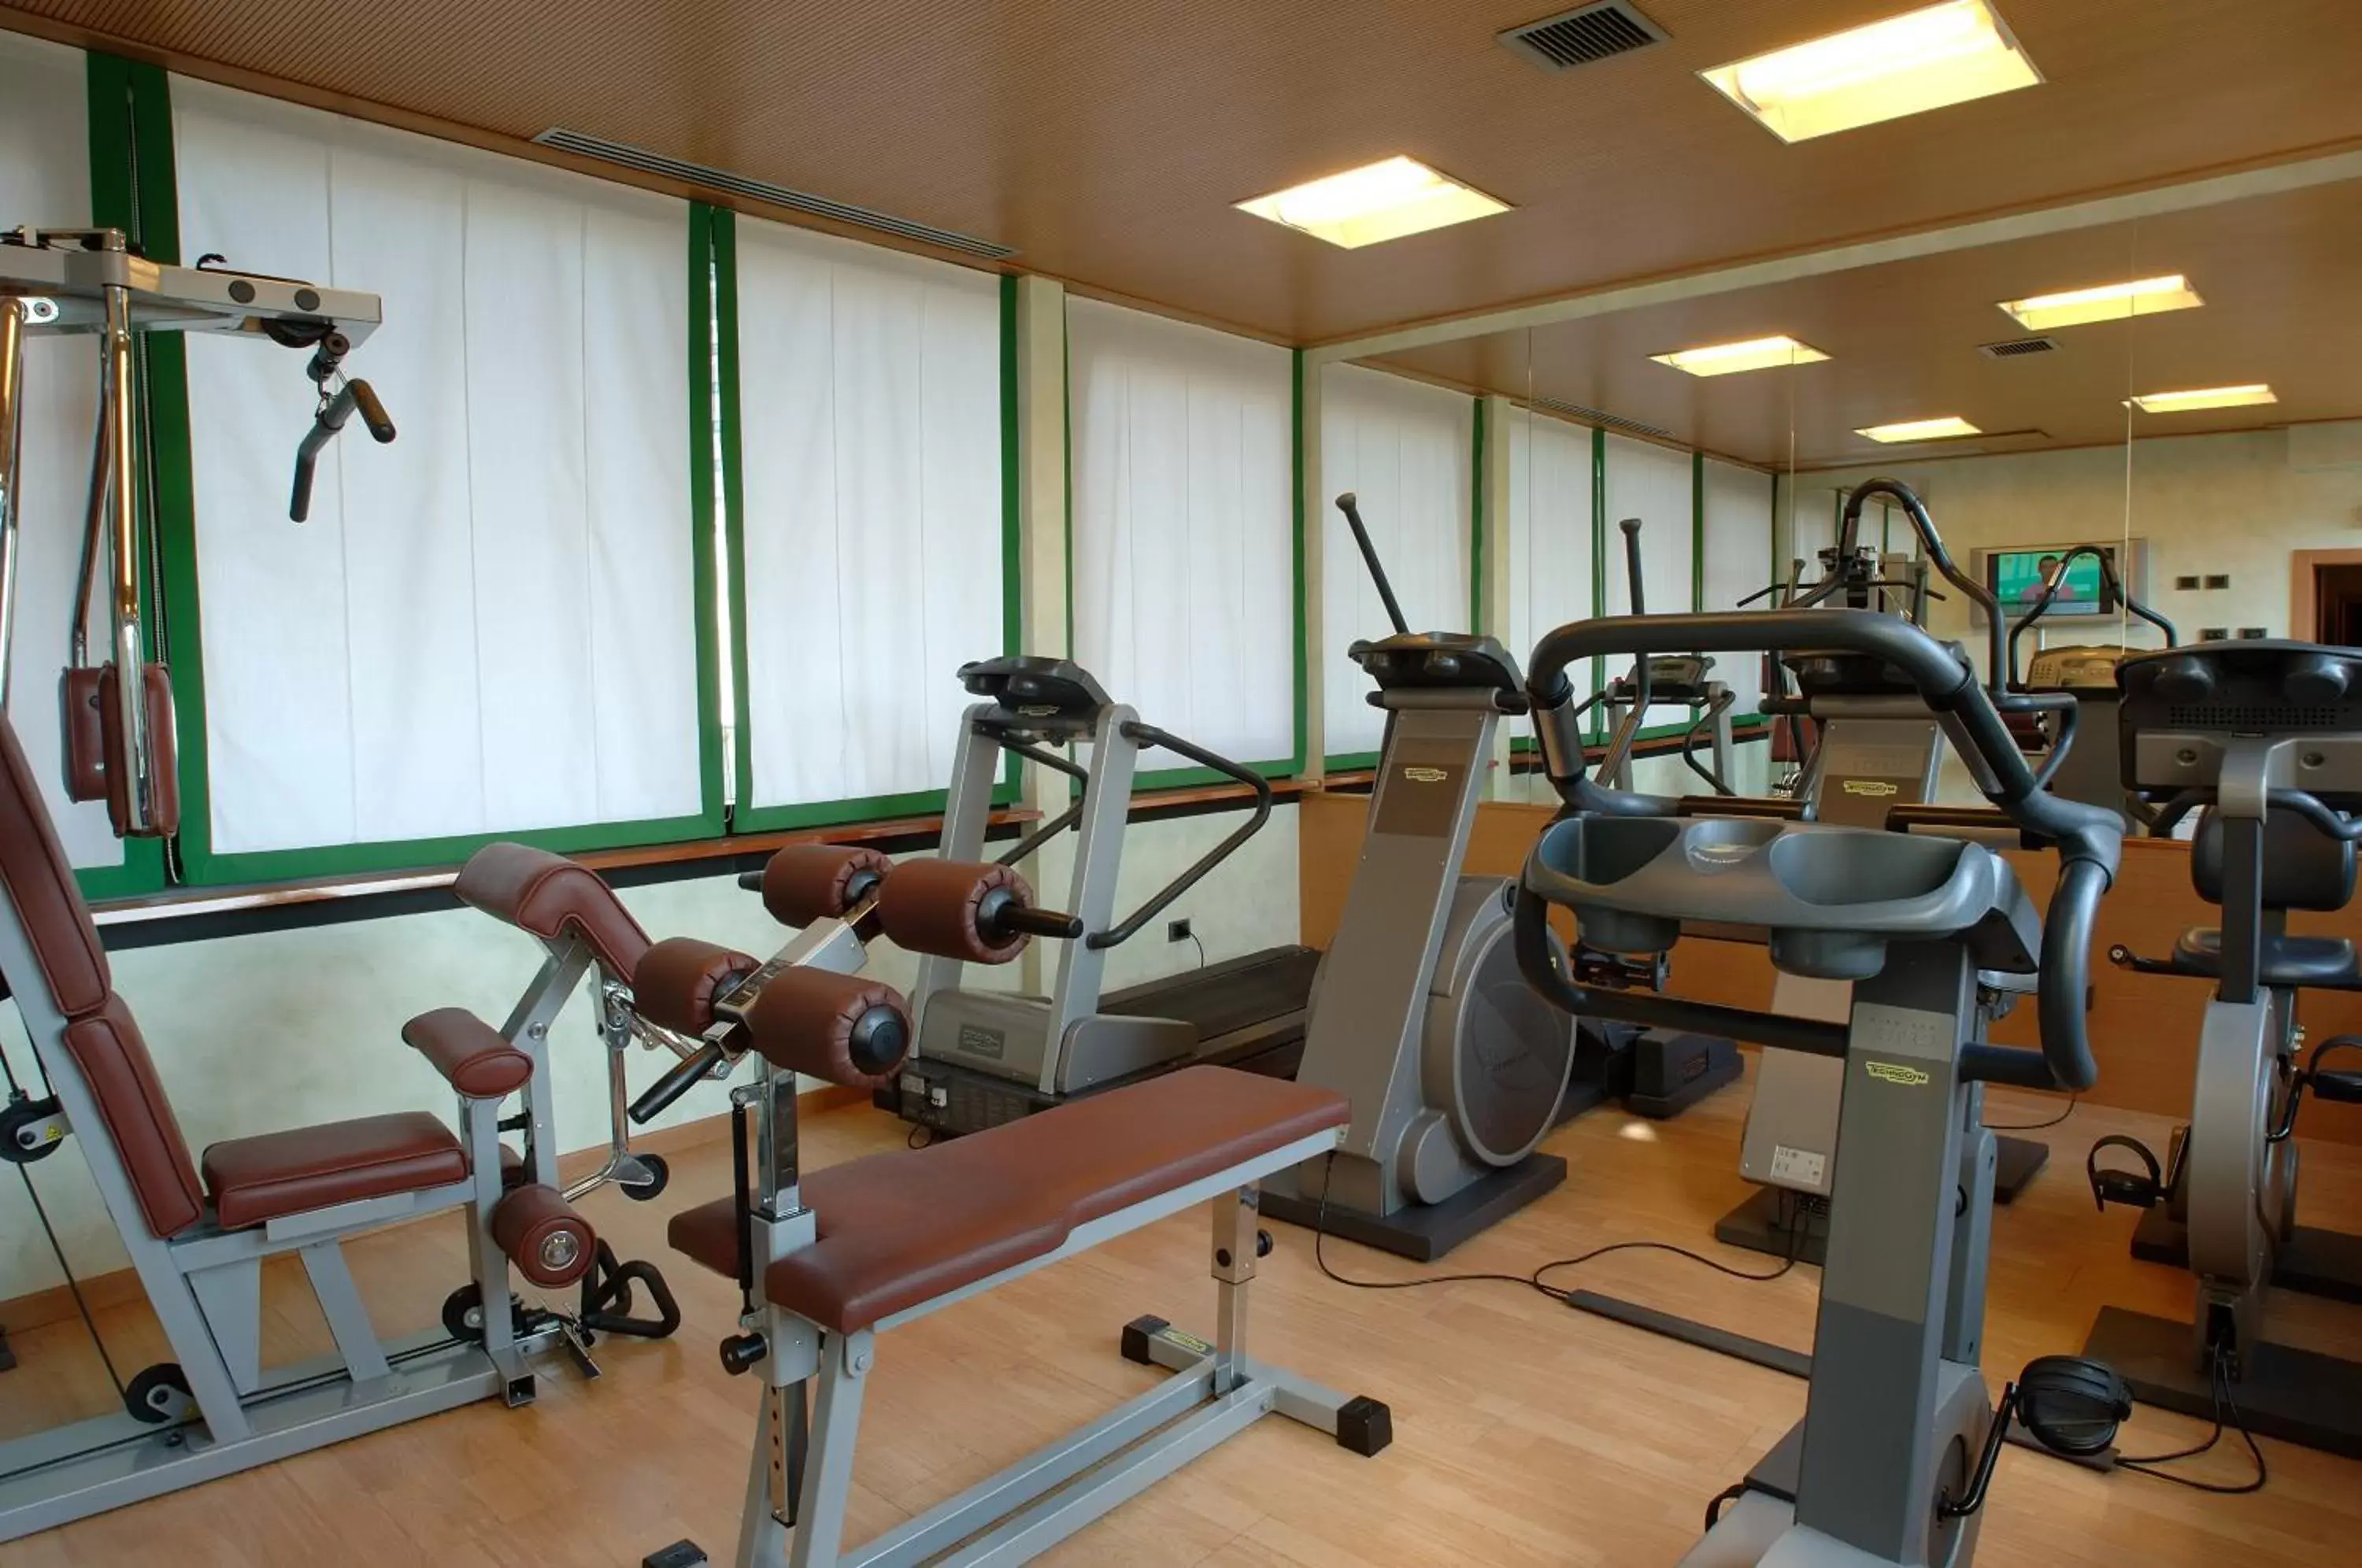 Fitness centre/facilities, Fitness Center/Facilities in c-hotels Rubens